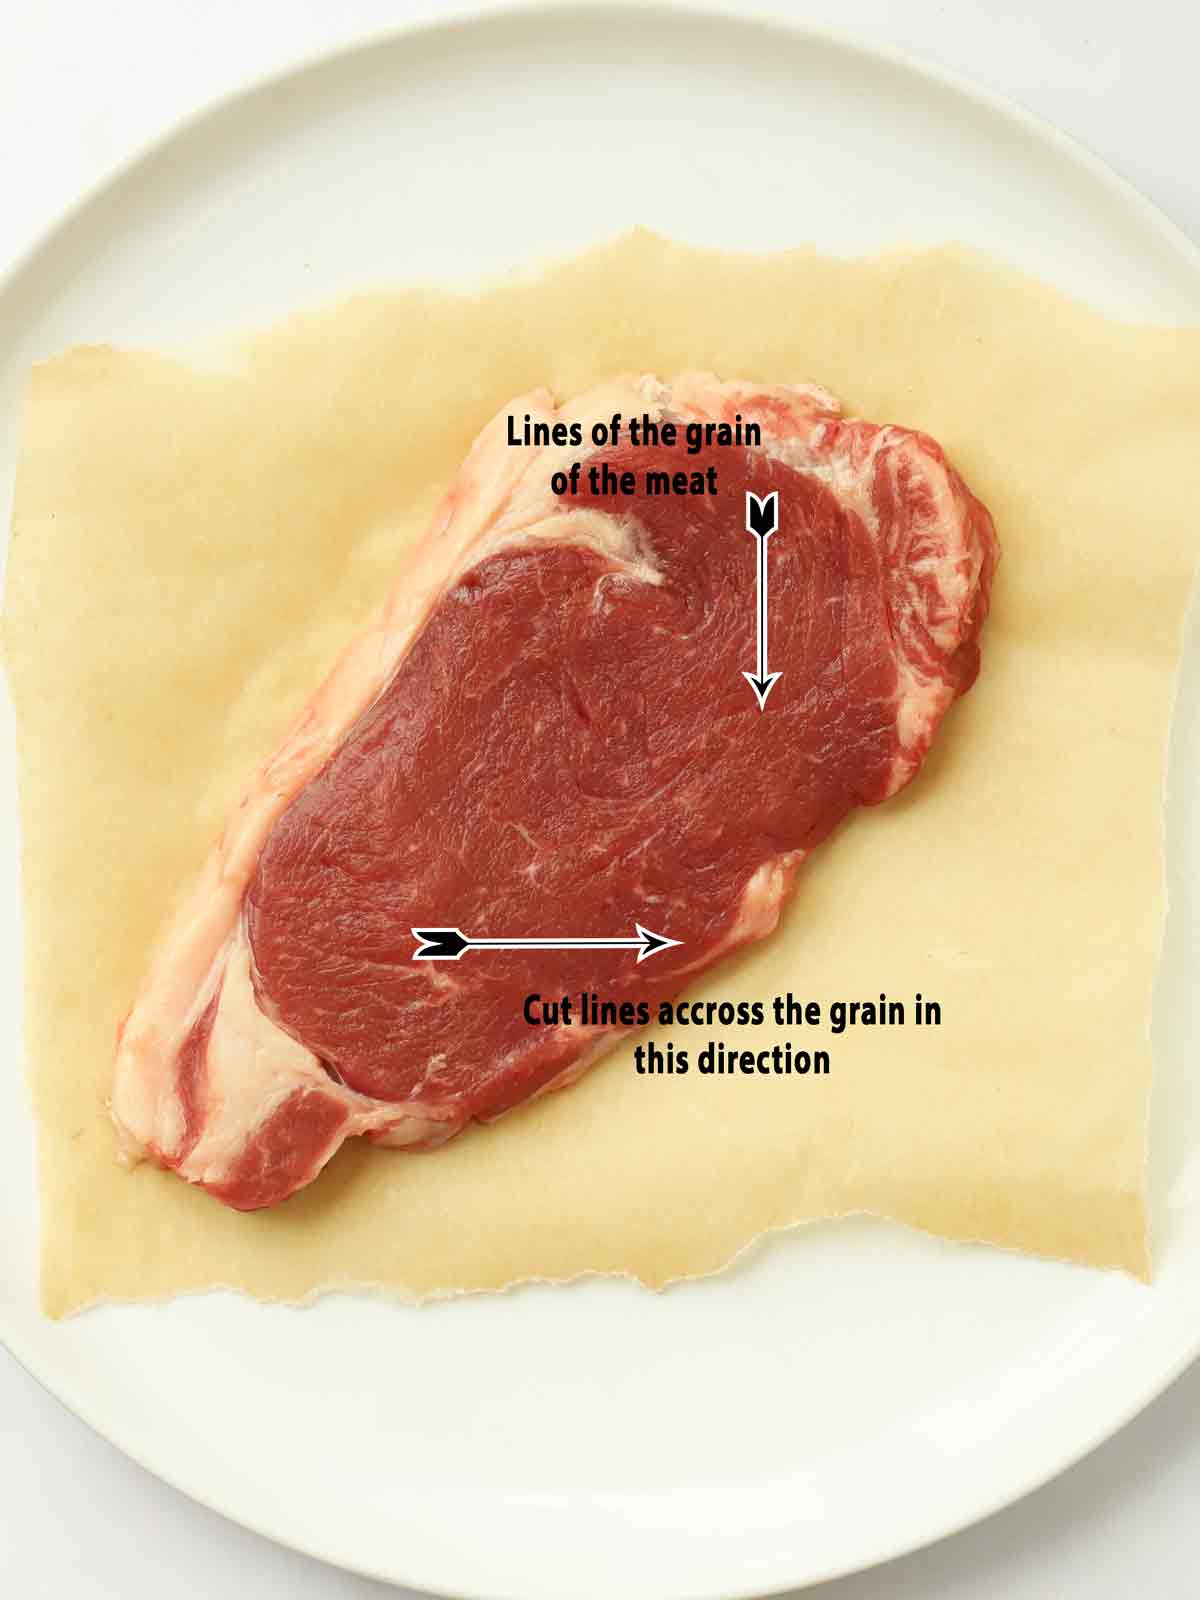 Image showing a raw steak with arrows explaining how to see the grain of the meat and cut against it.